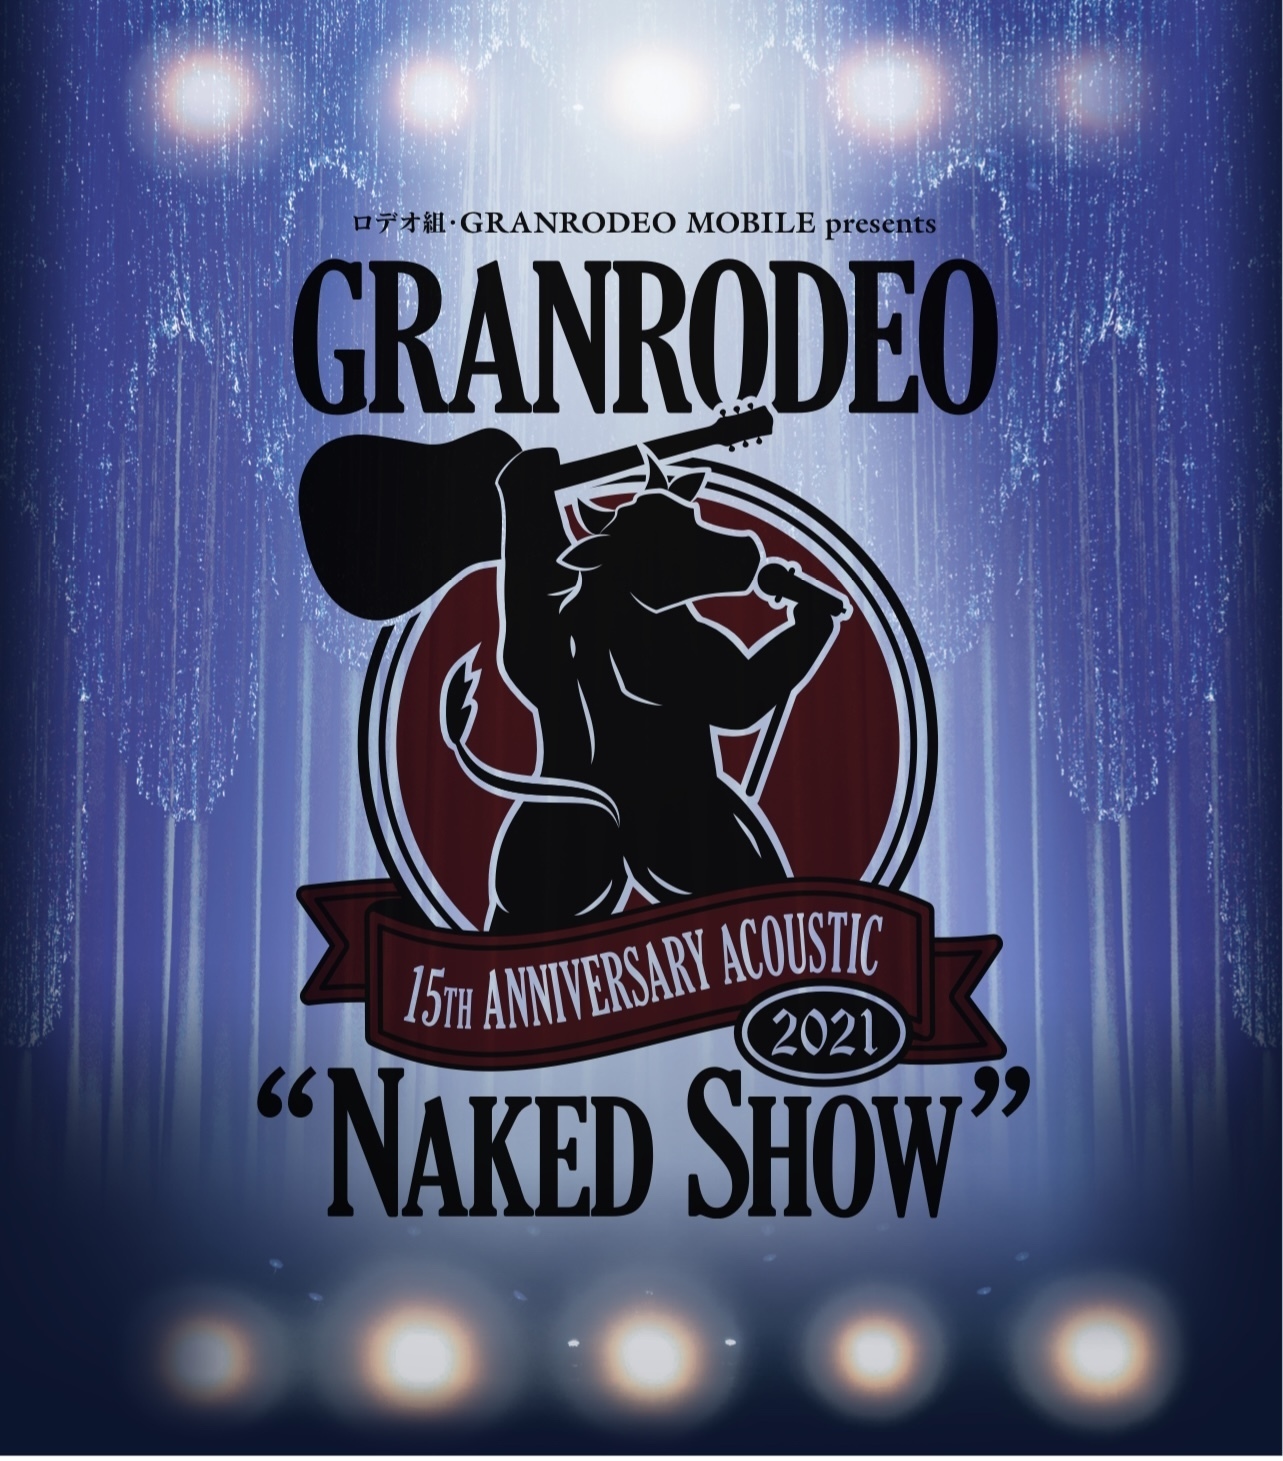 「GRANRODEO 15th Anniversary Acoustic 2021 “ Naked Show ”」＆「GRANRODEO 15th Anniversary Special Program 秋のファン祭り 2021」Blu-ray